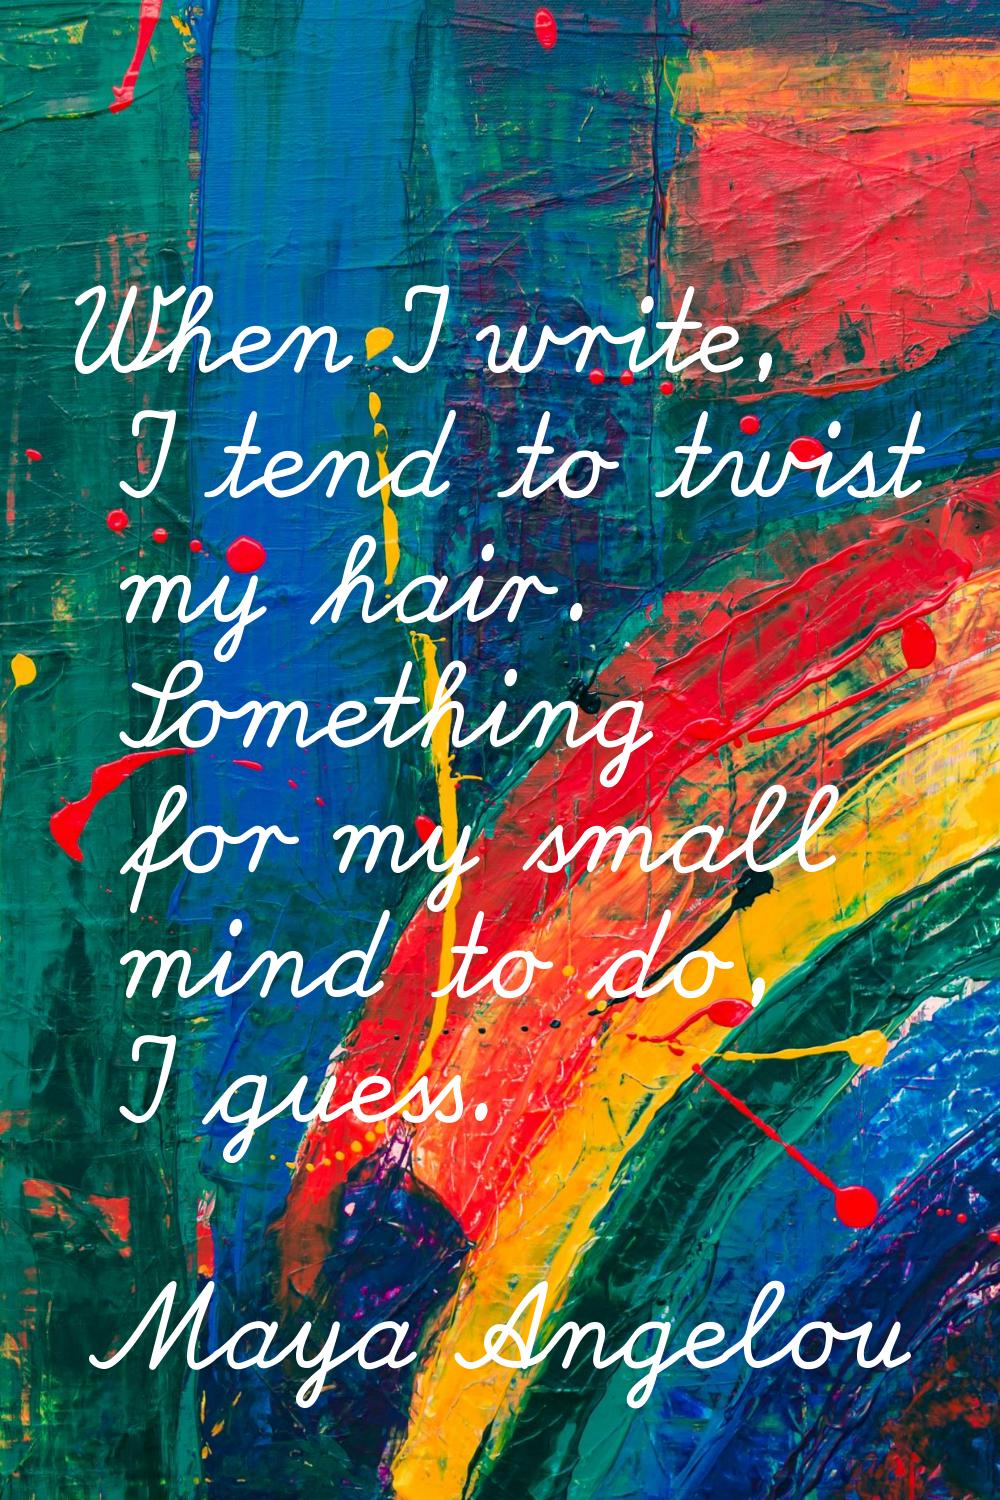 When I write, I tend to twist my hair. Something for my small mind to do, I guess.